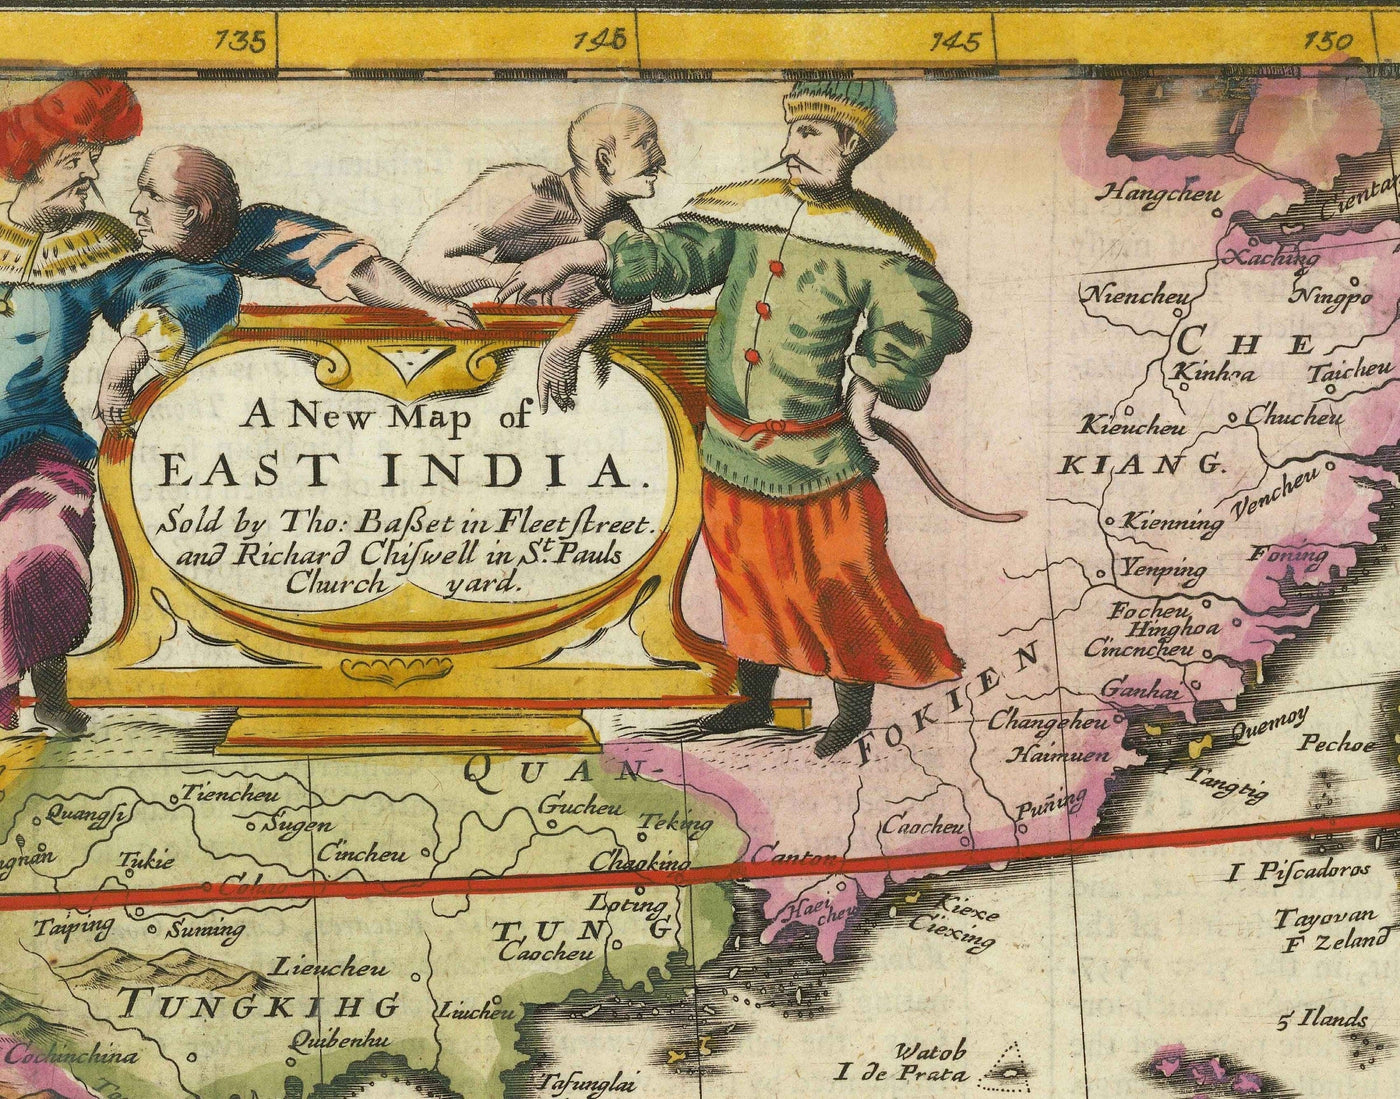 Old Map of India and South East Asia, 1676 by John Speed - Pakistan, Thailand, China, Indonesia, Taiwan